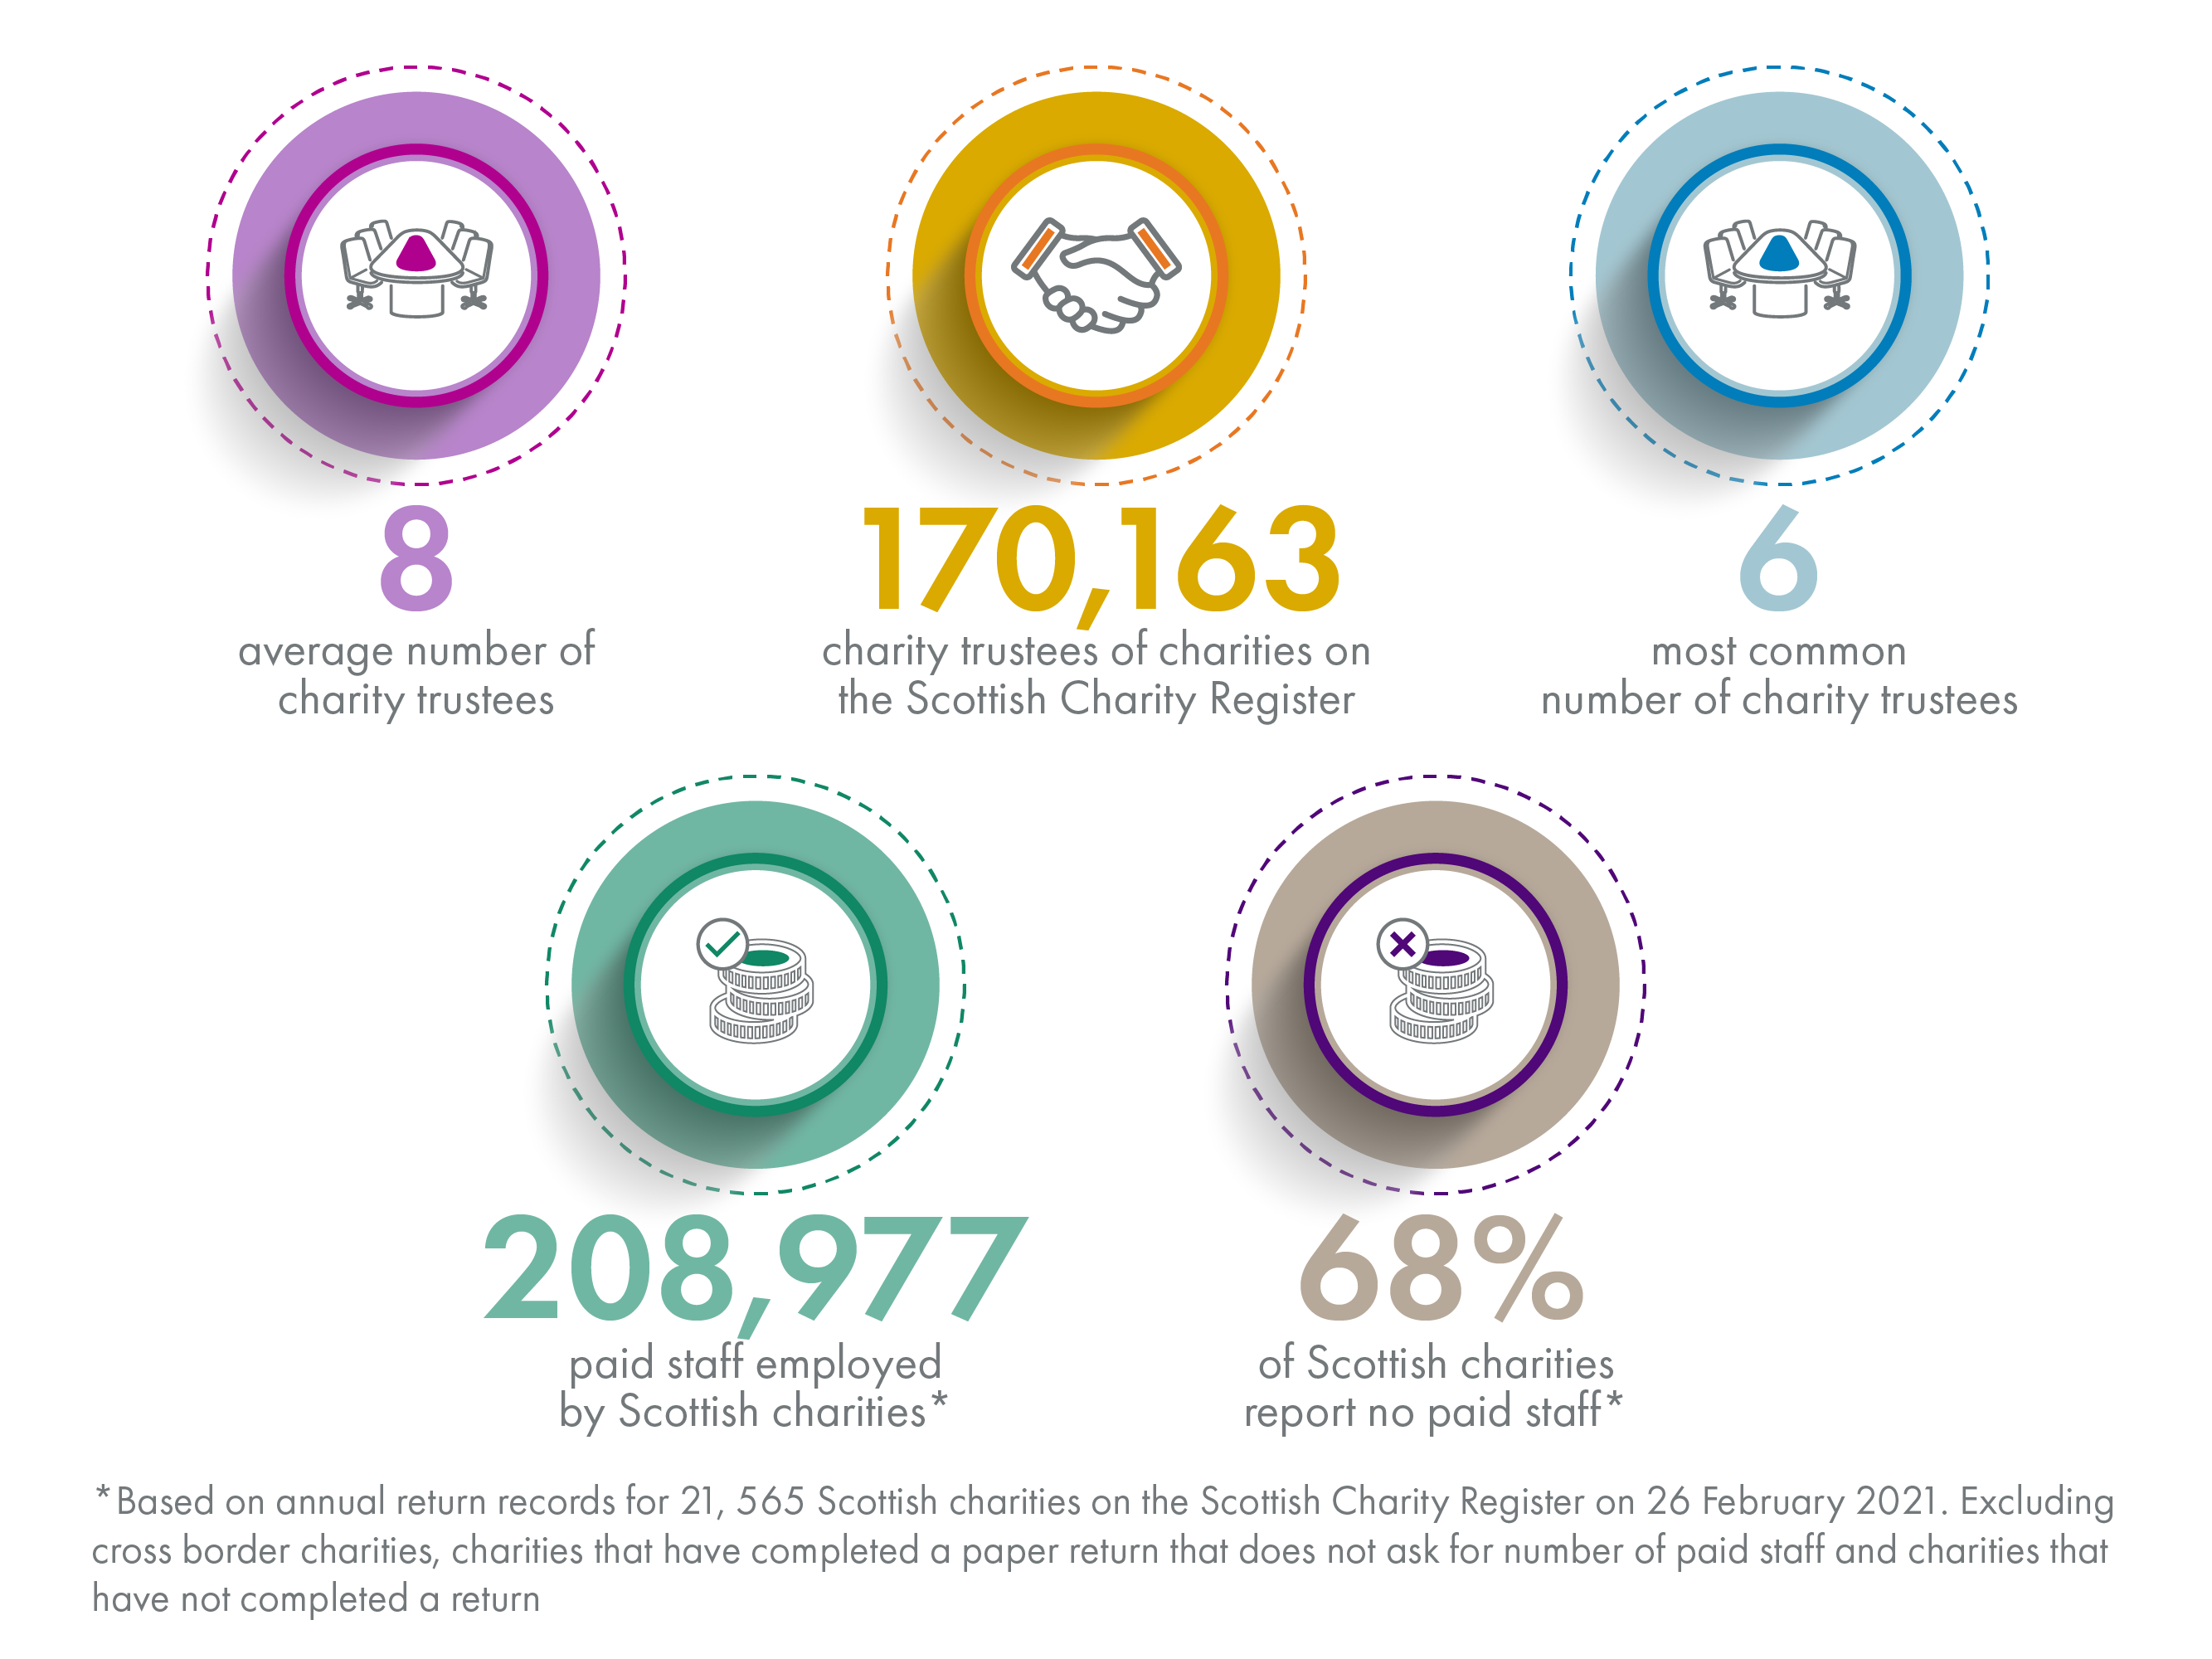 Image showing information on Scottish charity trustees and paid staff